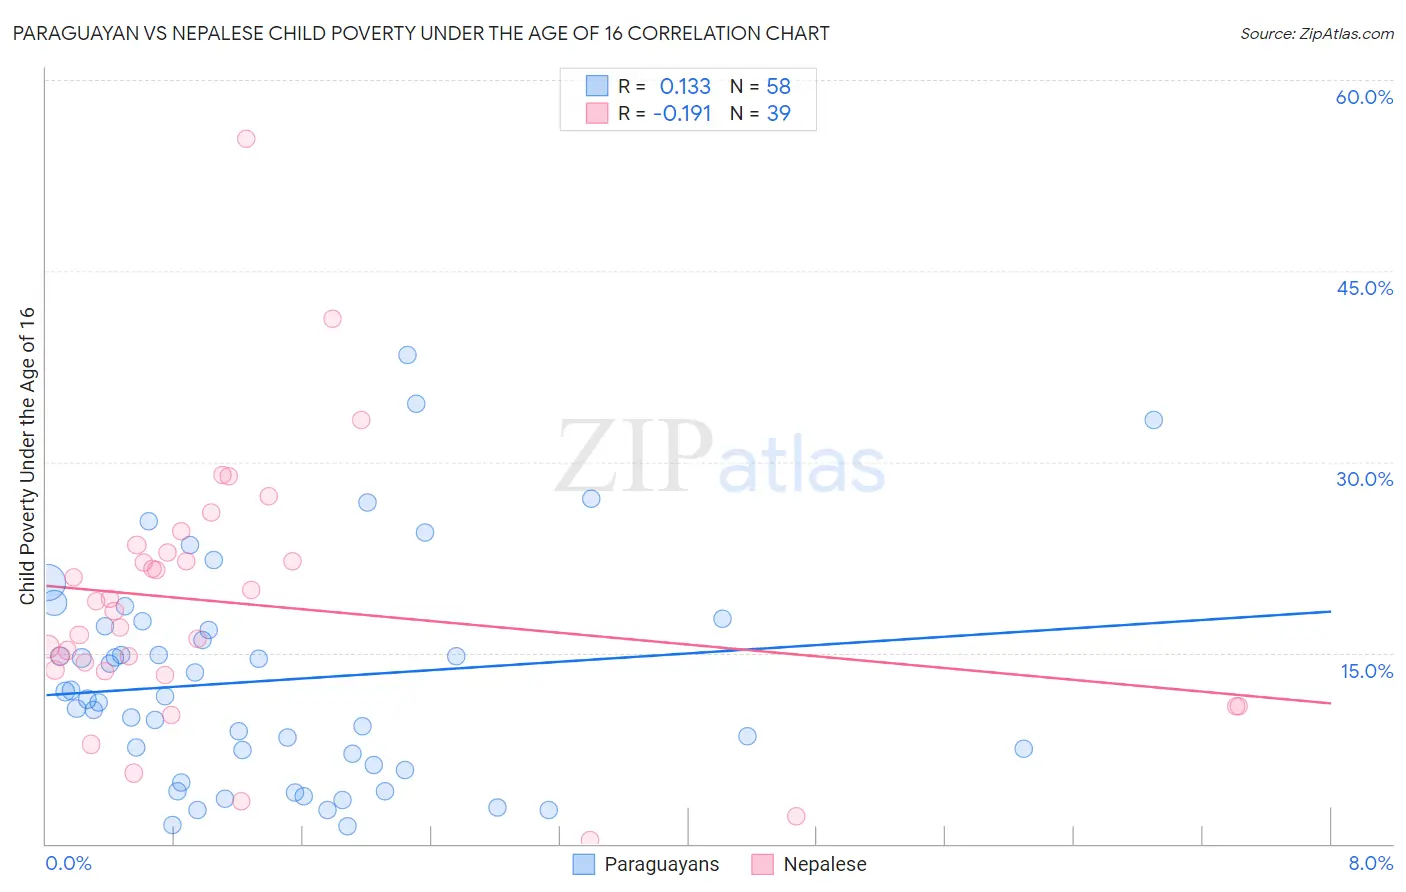 Paraguayan vs Nepalese Child Poverty Under the Age of 16